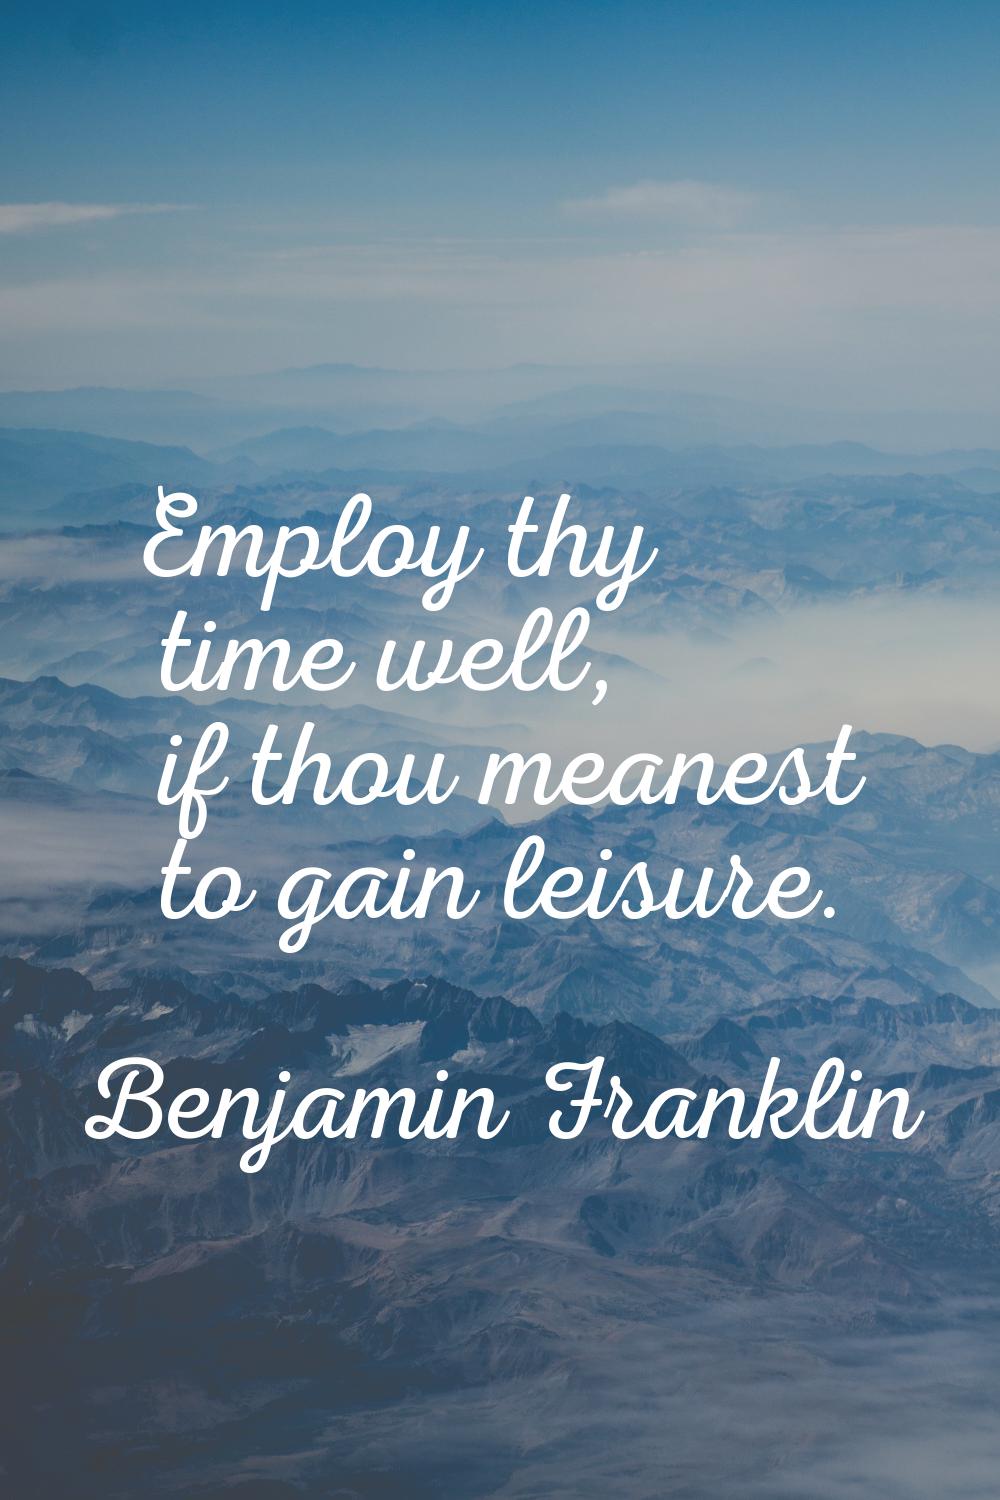 Employ thy time well, if thou meanest to gain leisure.